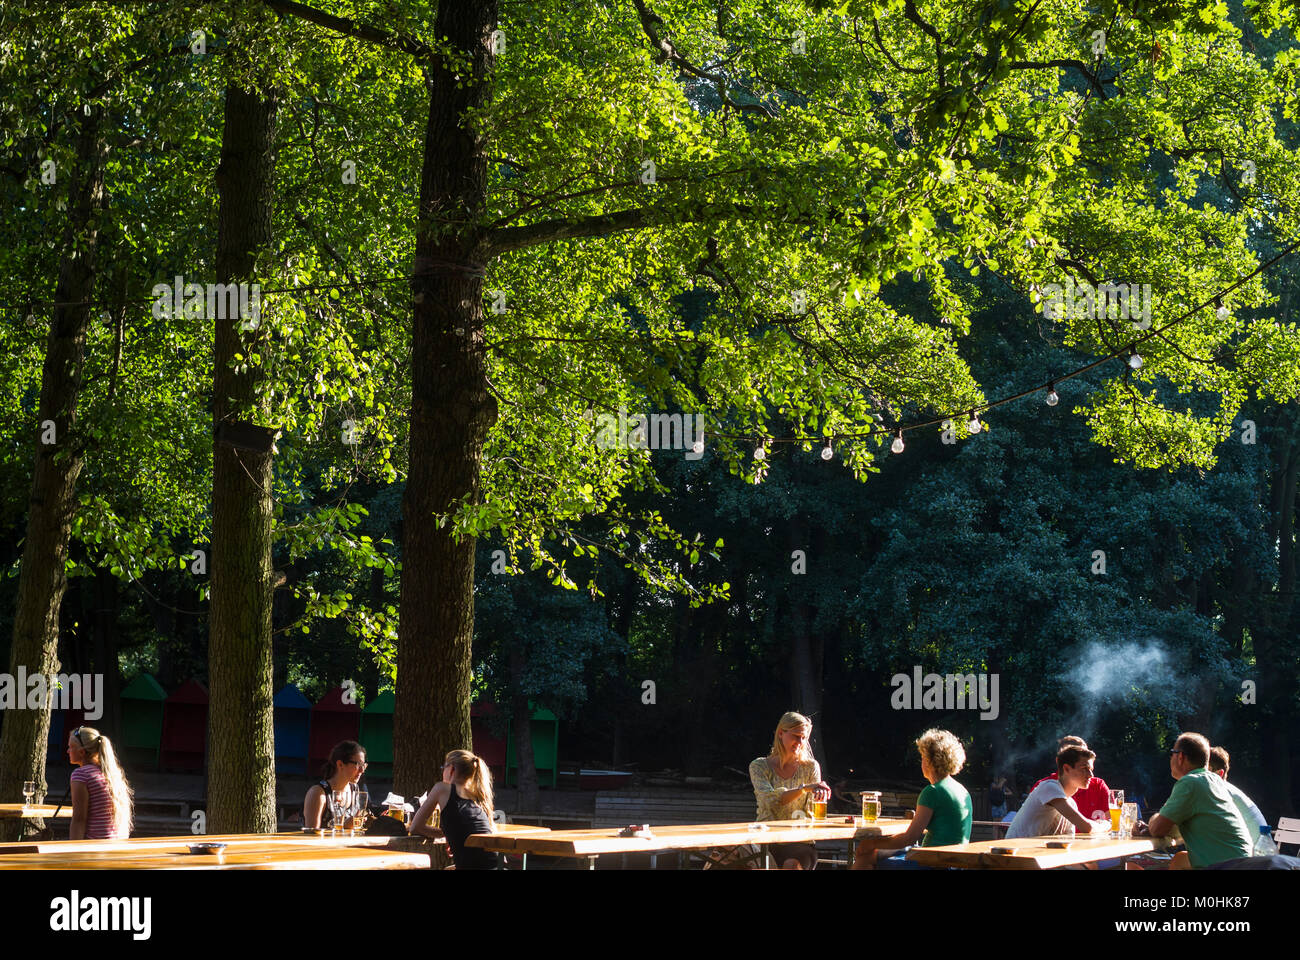 People relaxing at the Cafe Am Neuen See in the Tiergarten, Berlin, Germany. Stock Photo